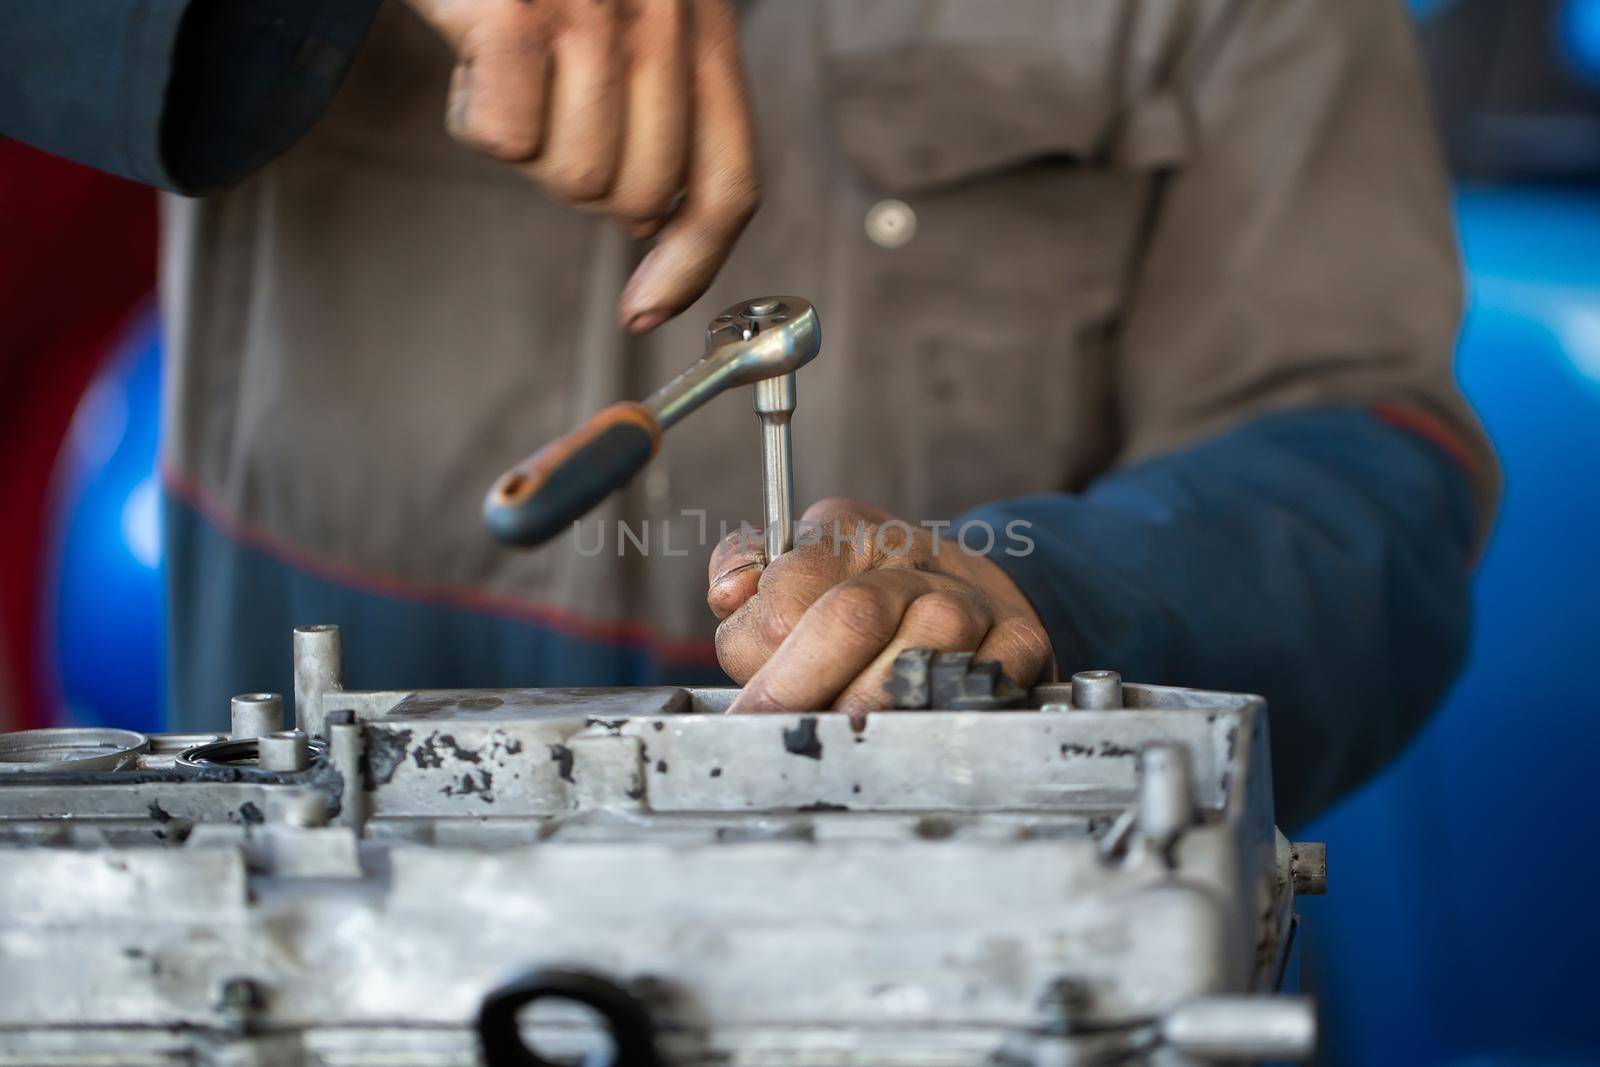 An auto mechanic repairs an internal combustion engine by StudioPeace